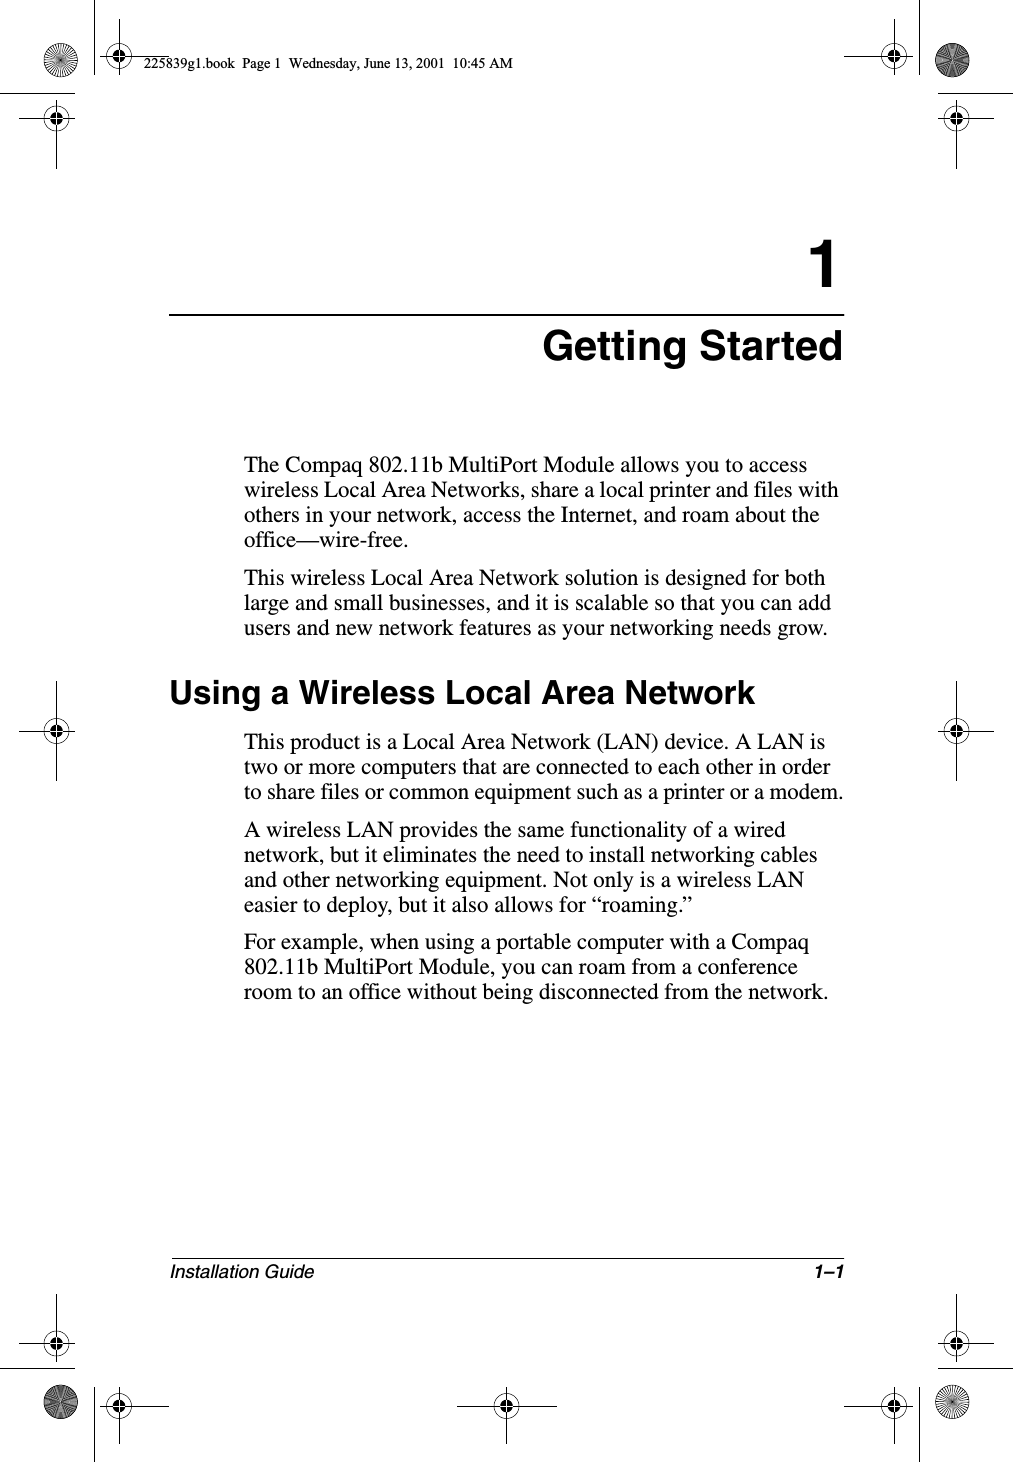 Installation Guide 1–11Getting StartedThe Compaq 802.11b MultiPort Module allows you to access wireless Local Area Networks, share a local printer and files with others in your network, access the Internet, and roam about the office—wire-free.This wireless Local Area Network solution is designed for both large and small businesses, and it is scalable so that you can add users and new network features as your networking needs grow.Using a Wireless Local Area NetworkThis product is a Local Area Network (LAN) device. A LAN is two or more computers that are connected to each other in order to share files or common equipment such as a printer or a modem.A wireless LAN provides the same functionality of a wired network, but it eliminates the need to install networking cables and other networking equipment. Not only is a wireless LAN easier to deploy, but it also allows for “roaming.”For example, when using a portable computer with a Compaq 802.11b MultiPort Module, you can roam from a conference room to an office without being disconnected from the network.225839g1.book  Page 1  Wednesday, June 13, 2001  10:45 AM